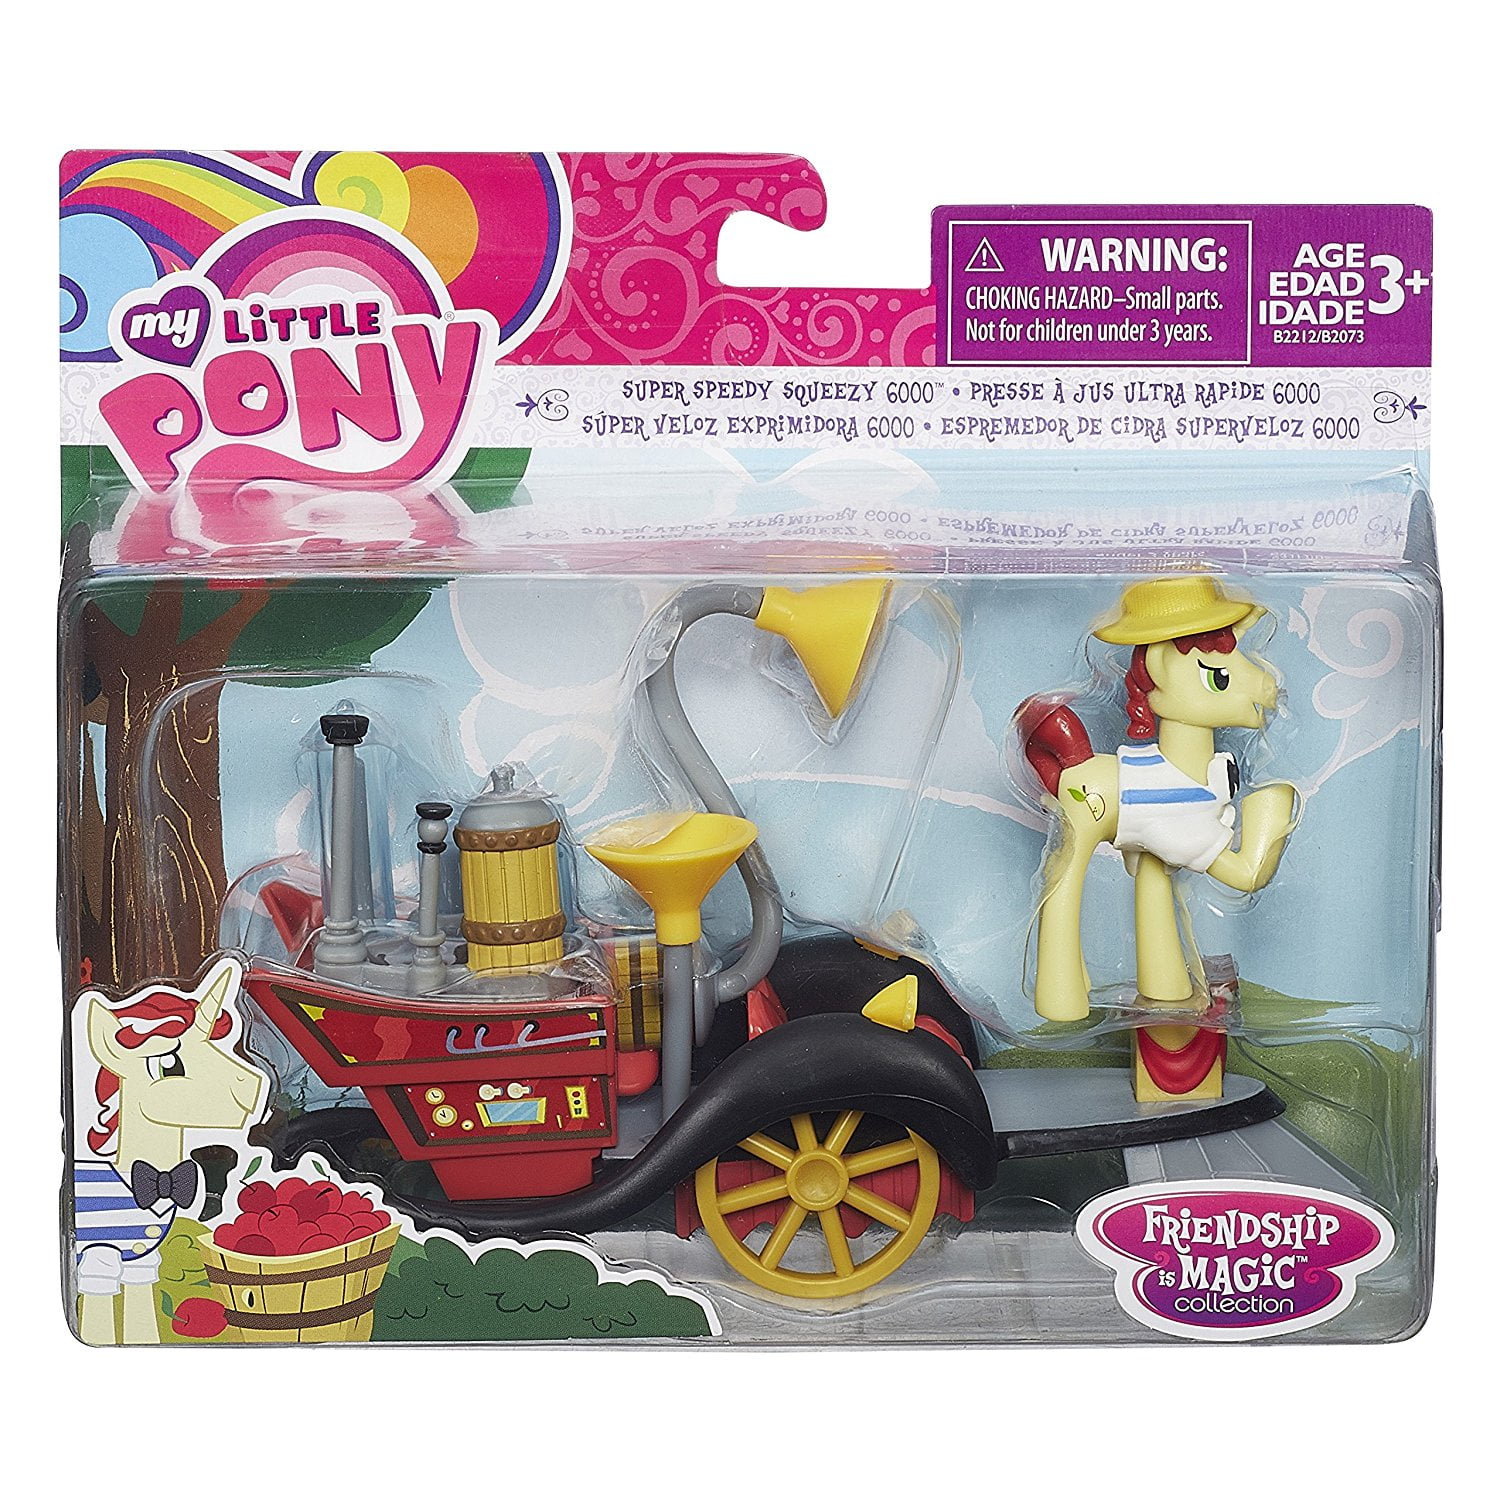 Details about    My Little Pony Friendship is Magic Collection Super Speedy Squeezy 6000 Set